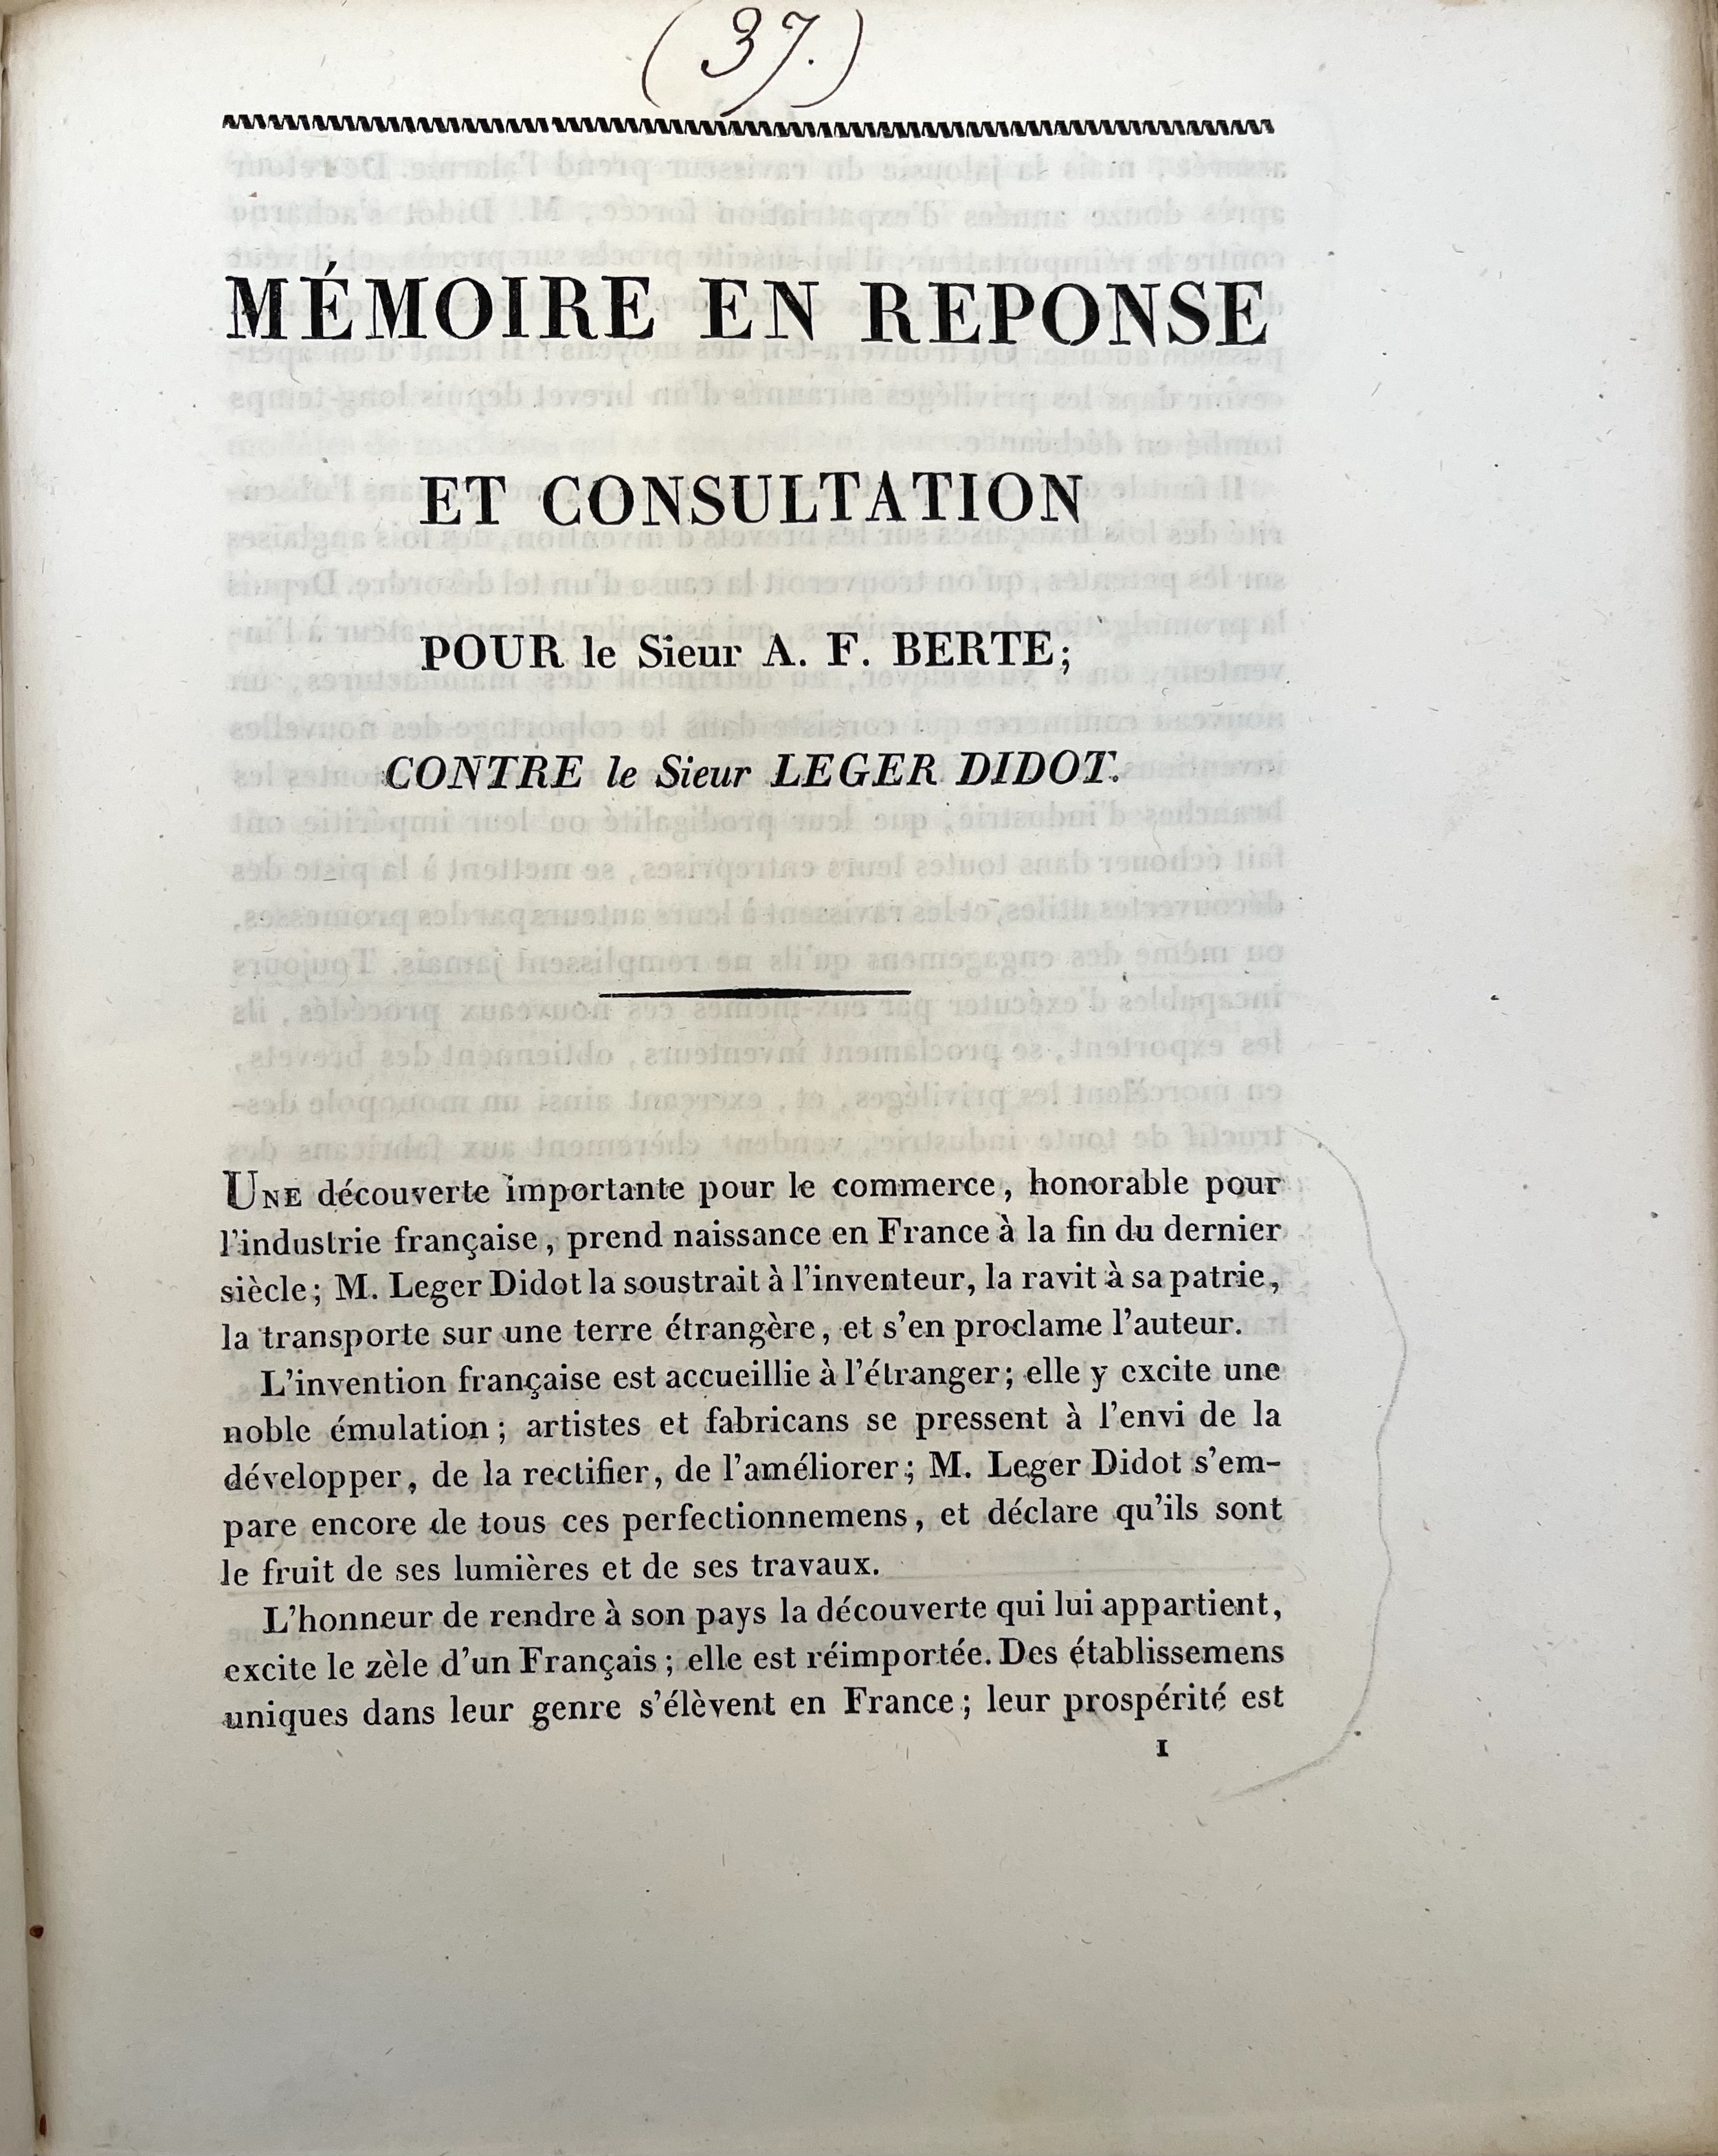 Berte's privately printed response to Didot's suit for patent infringement.